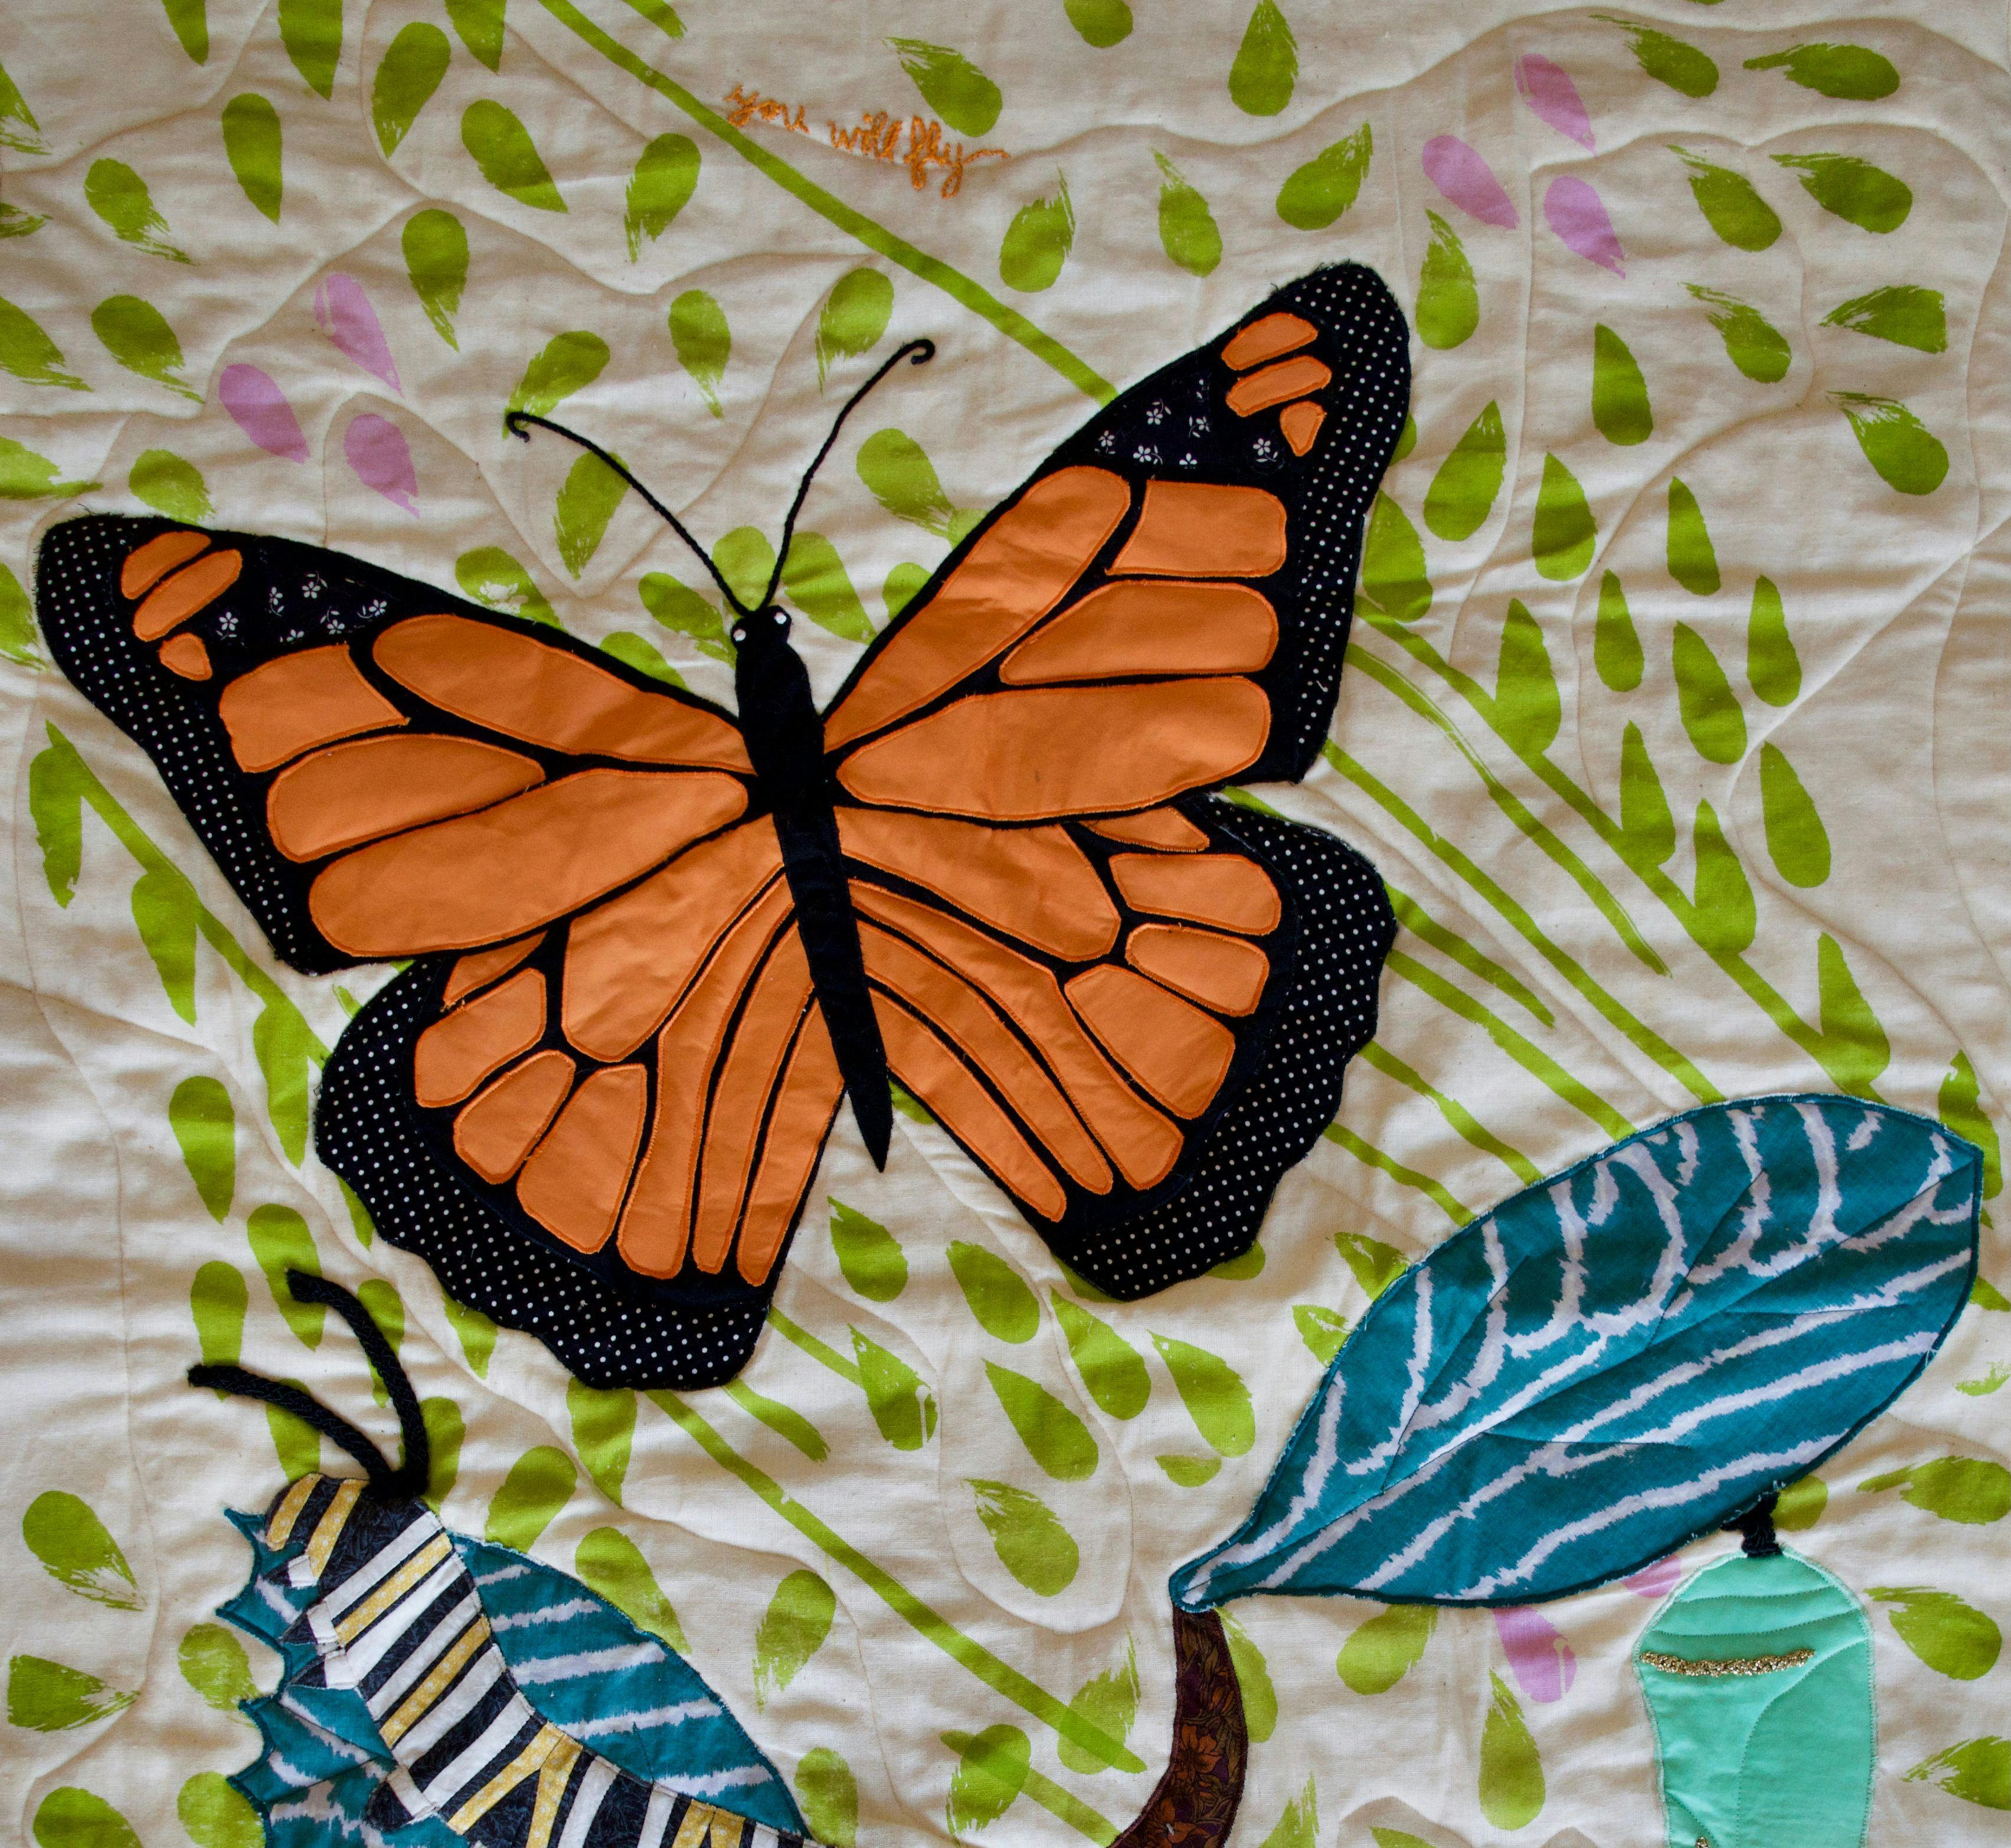 A quilt showing the life cycle of a monarch butterfly.